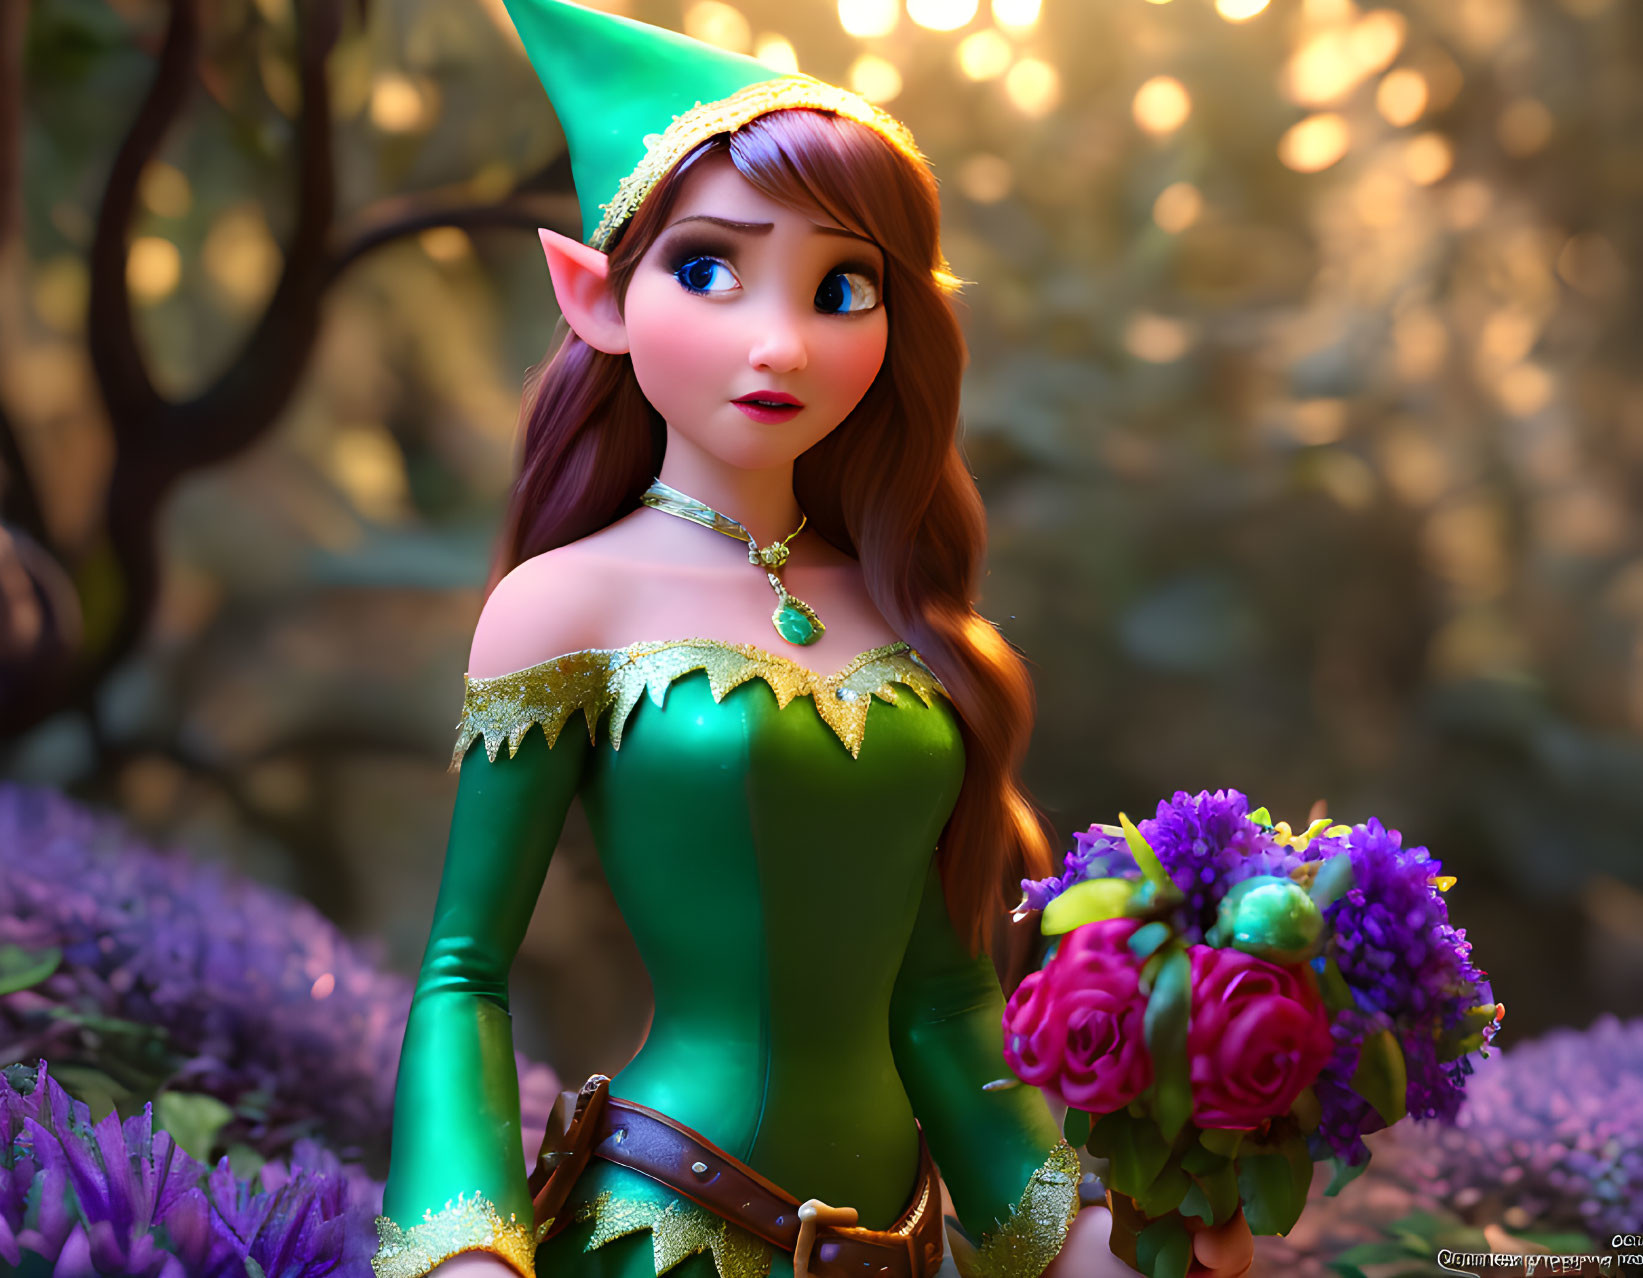 Animated female elf with auburn hair in green dress among purple forest flora